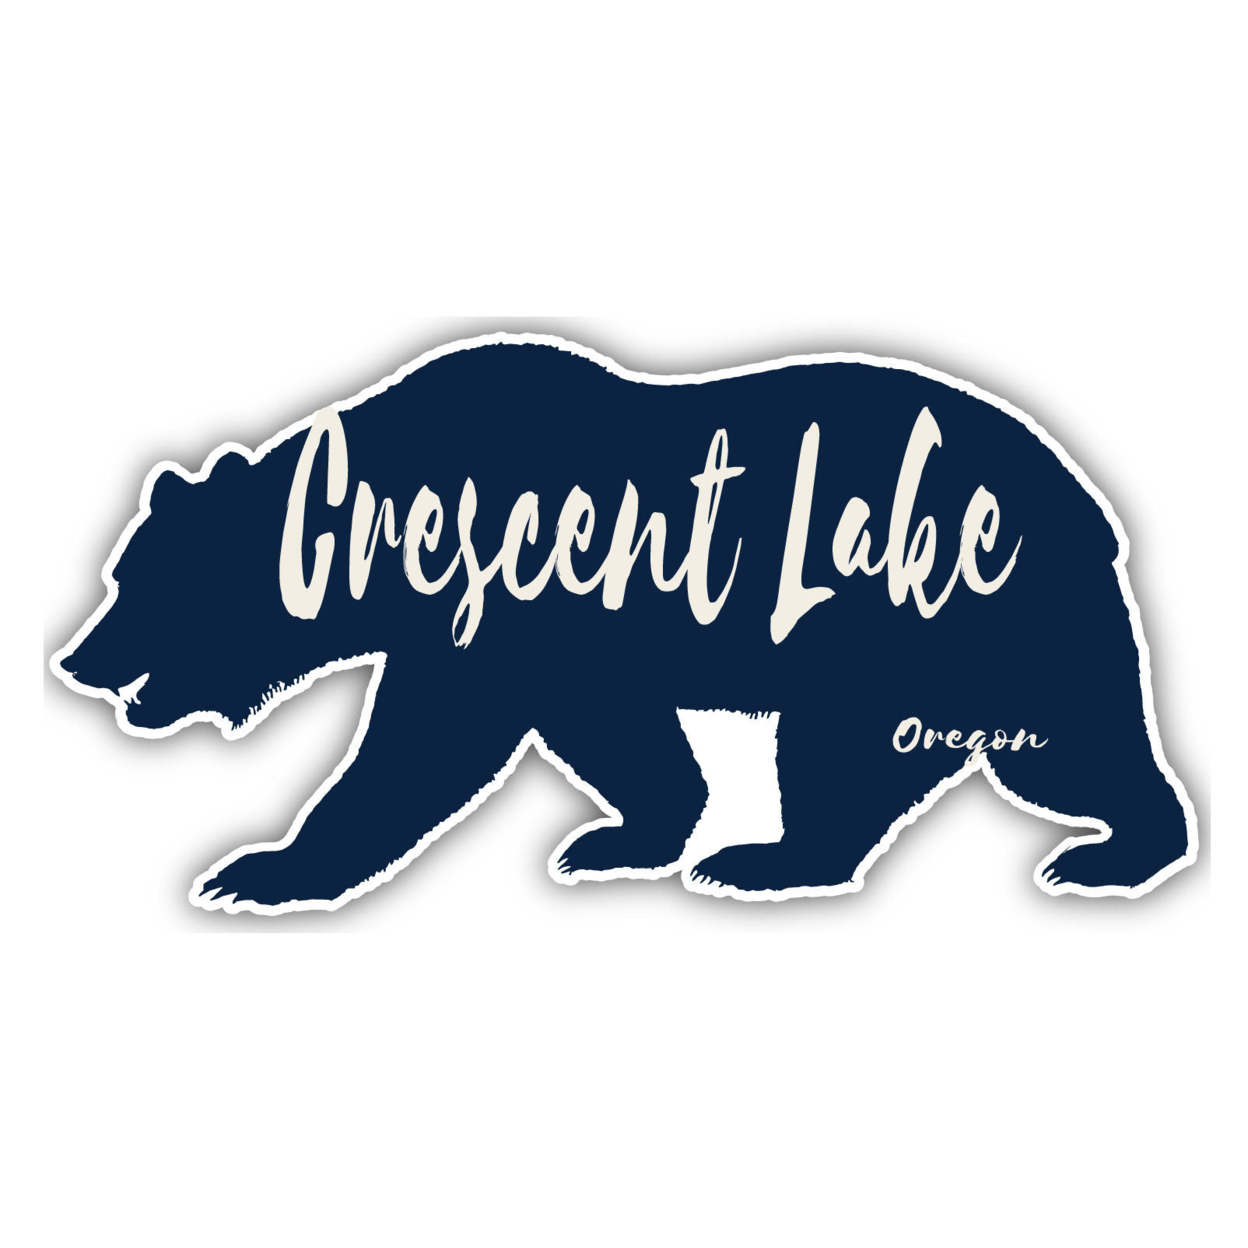 Crescent Lake Oregon Souvenir Decorative Stickers (Choose Theme And Size) - 4-Pack, 8-Inch, Camp Life